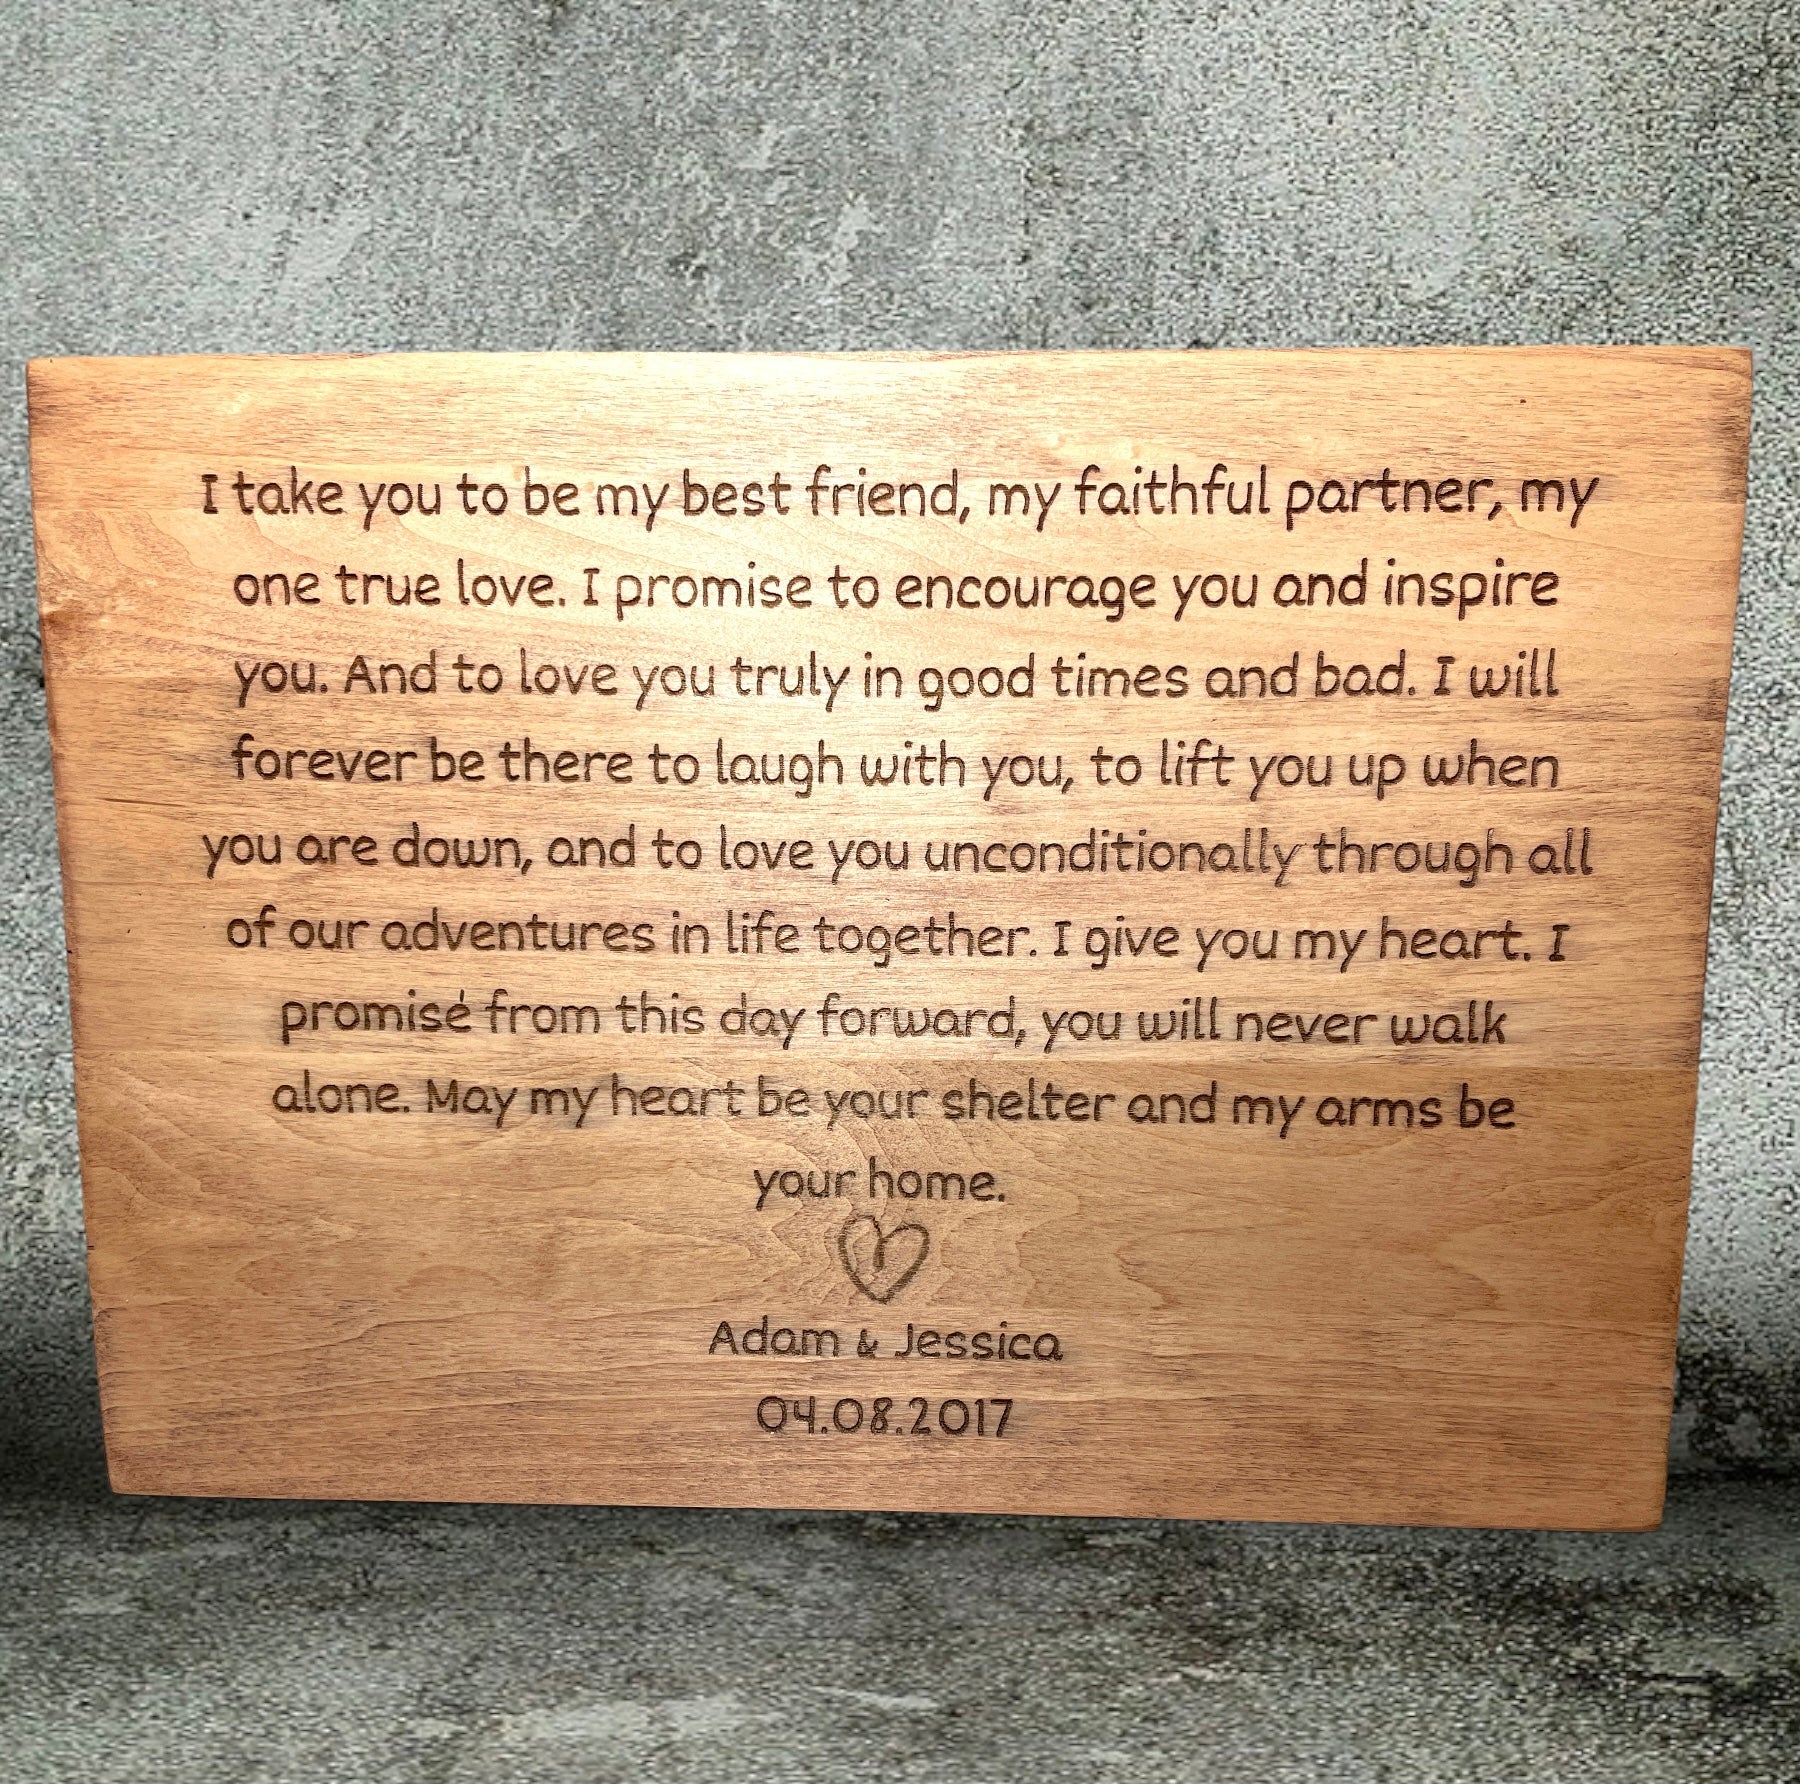 "I Take You To Be My Bestfriend" Wedding Vows Sign Signs Weaver Custom Engravings   